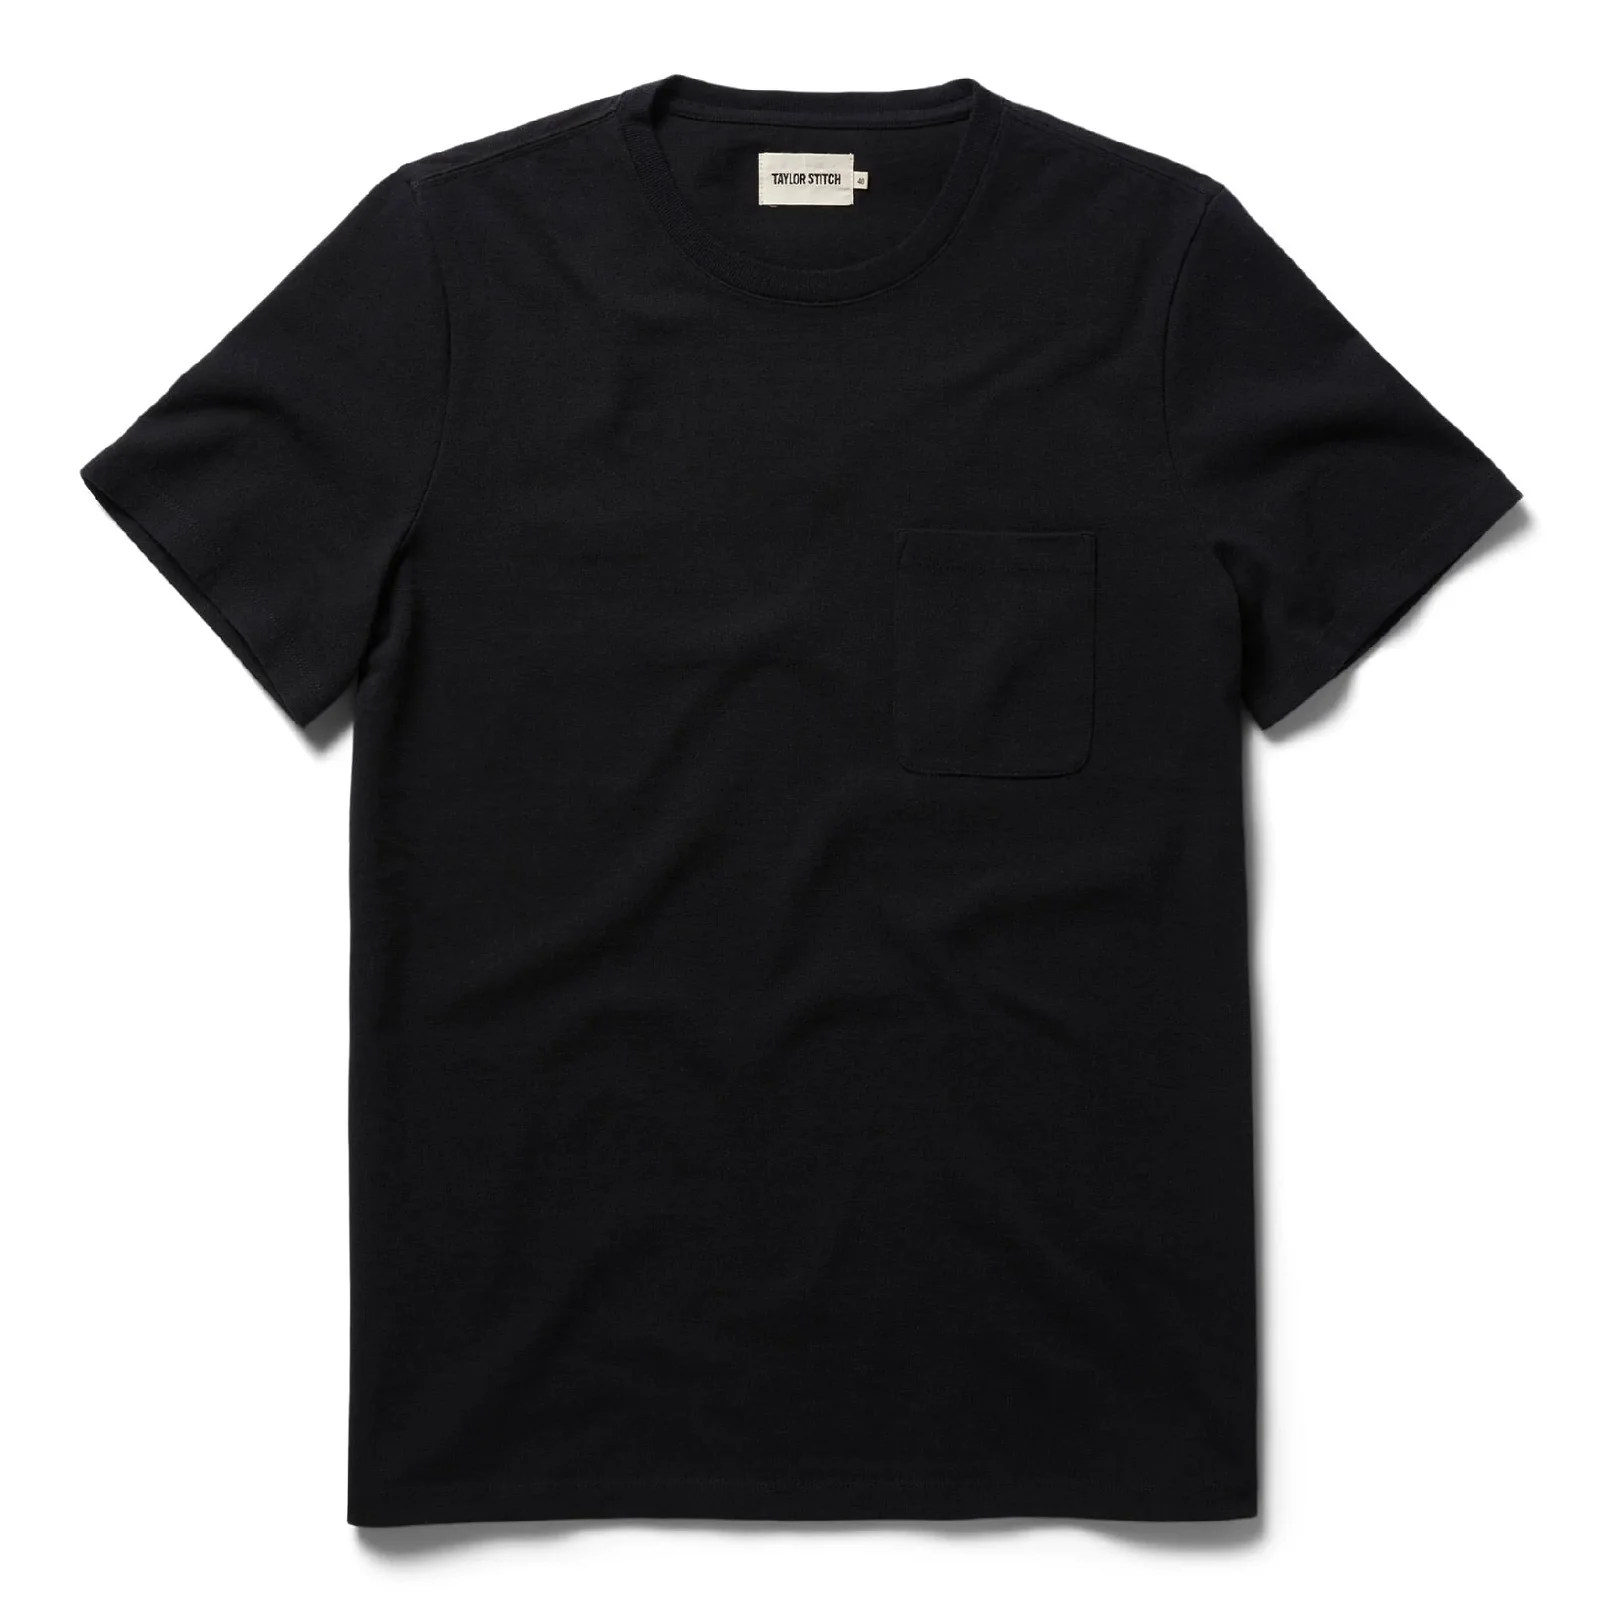 Image of The Heavy Bag Tee in Black